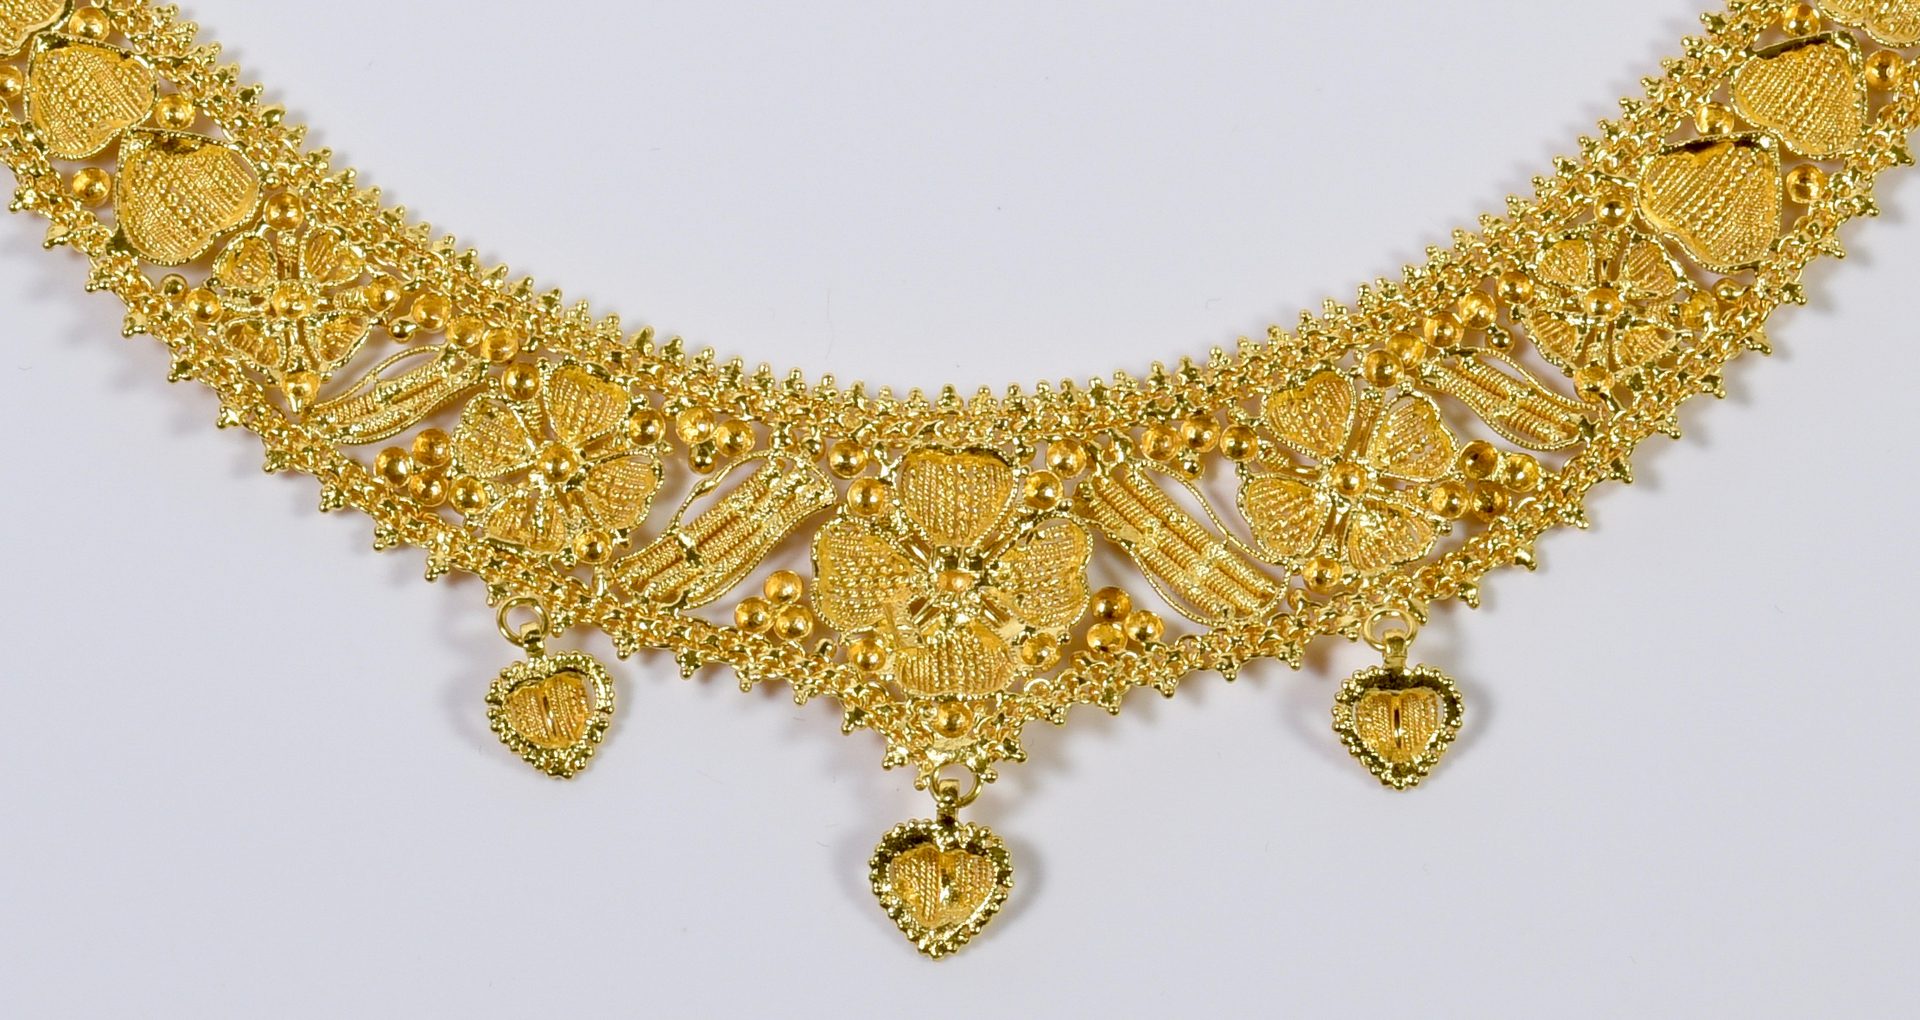 Lot 777: 21K Gold Bib Necklace and Earrings